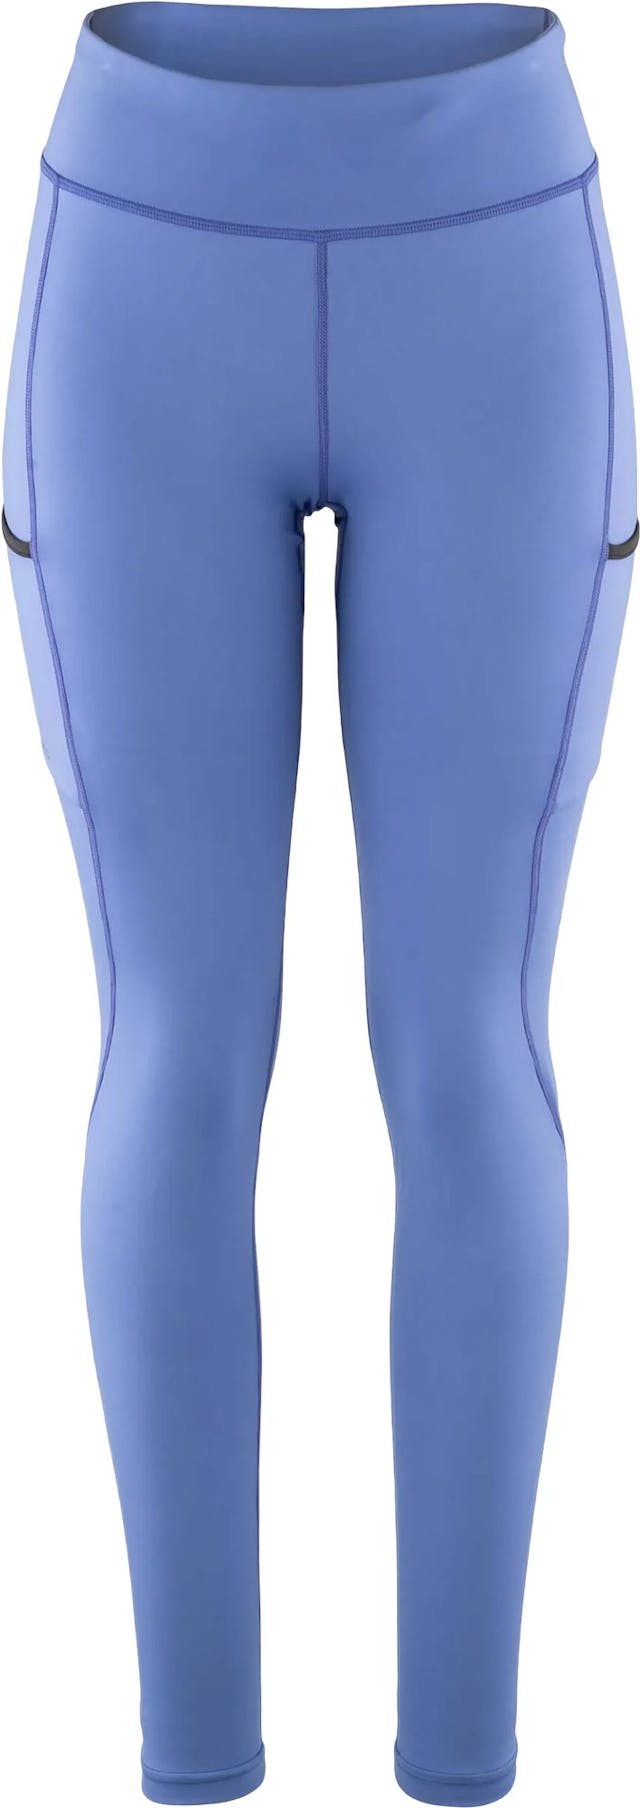 Product image for Active Tights - Women's